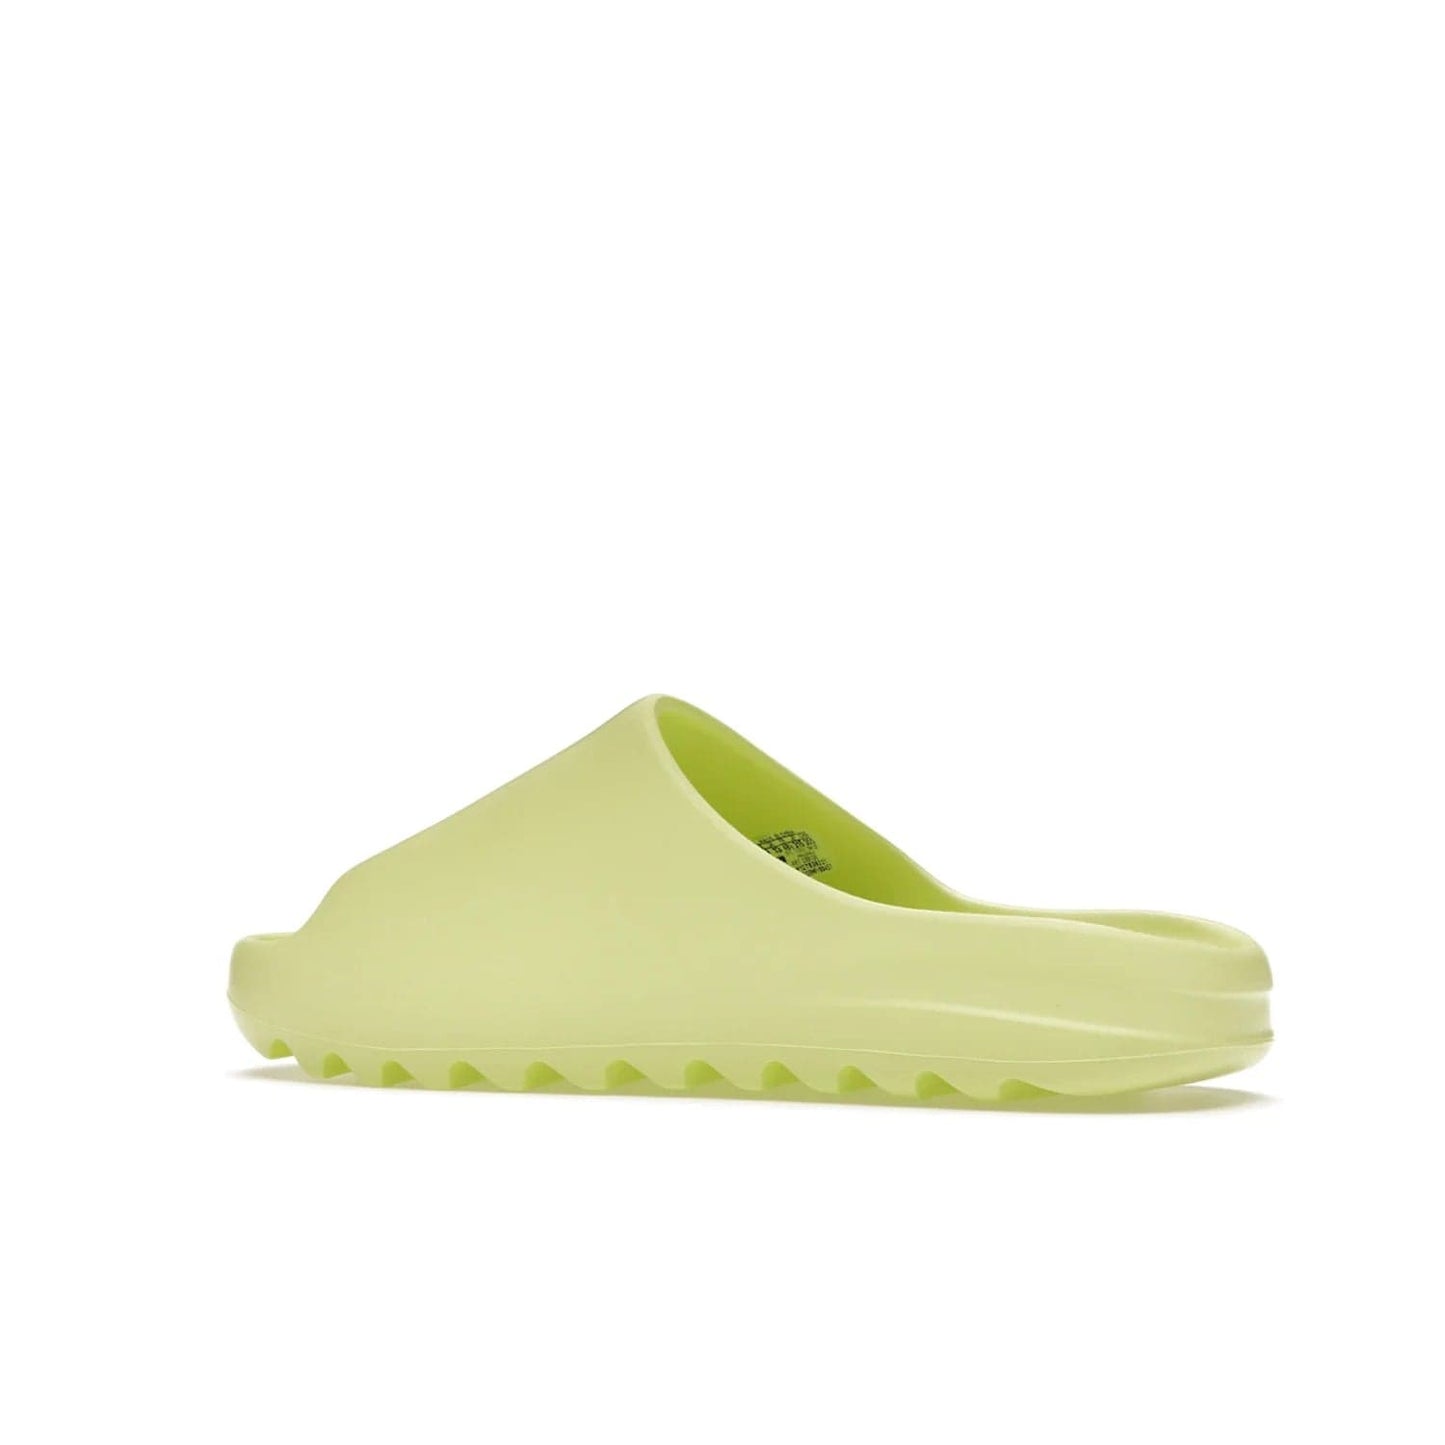 adidas Yeezy Slide Glow Green - Image 22 - Only at www.BallersClubKickz.com - Experience an unexpected summer style with the adidas Yeezy Slide Glow Green. This limited edition slide sandal provides a lightweight and durable construction and a bold Glow Green hue. Strategic grooves enhance traction and provide all-day comfort. Make a statement with the adidas Yeezy Slide Glow Green.